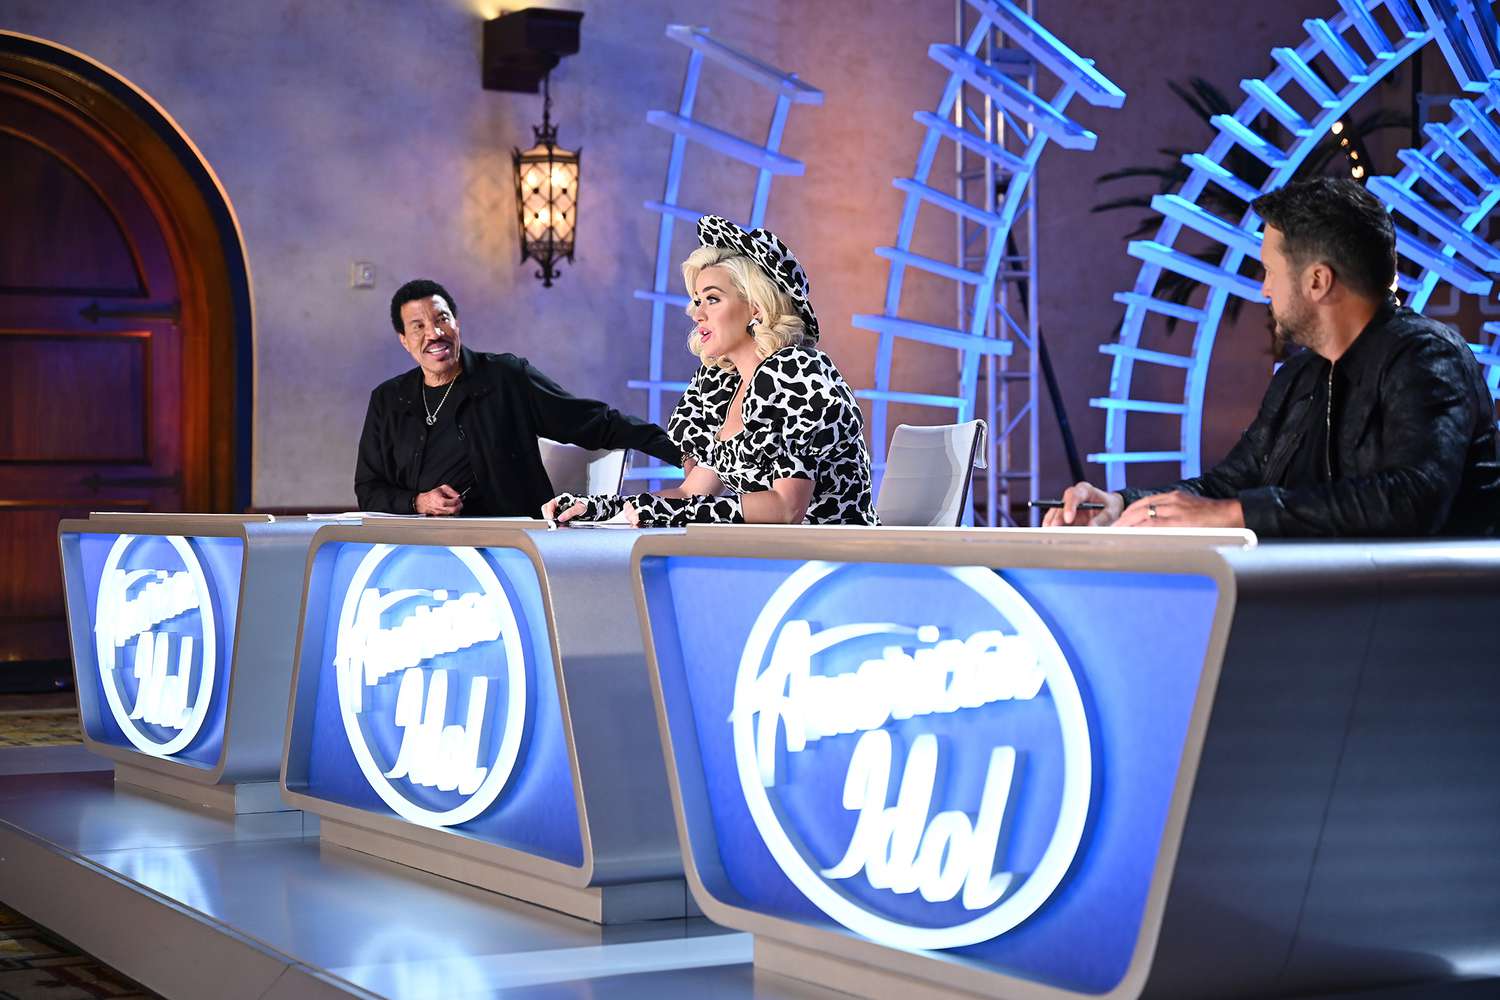 American Idol recap: Have we already met some front-runners?